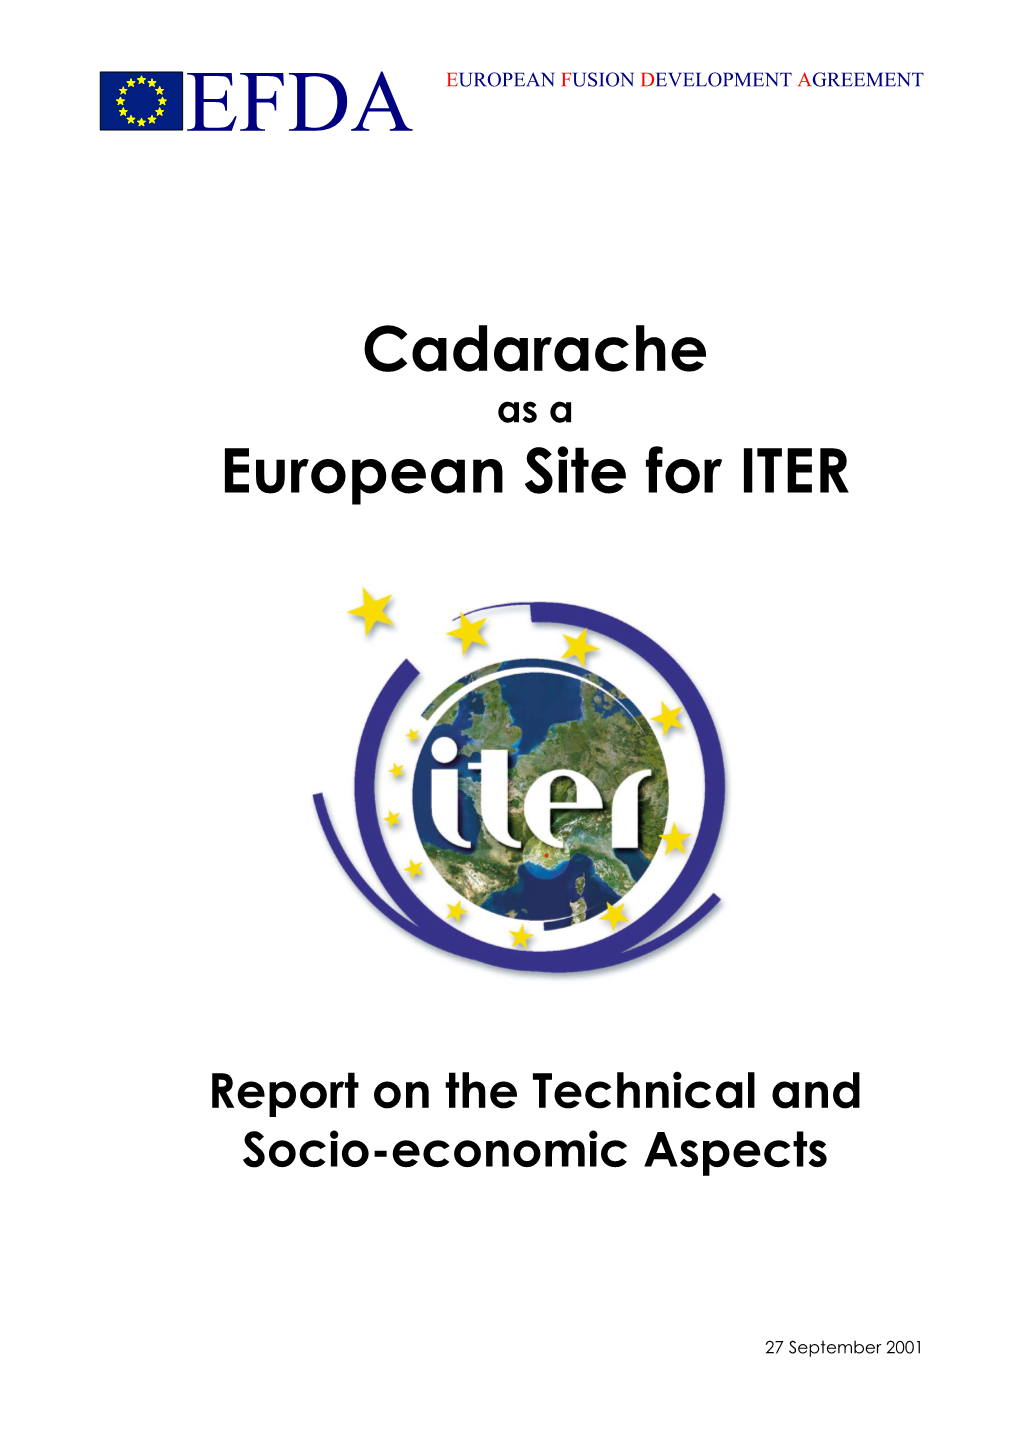 ITER in Cadarache, a Possible European Site for ITER